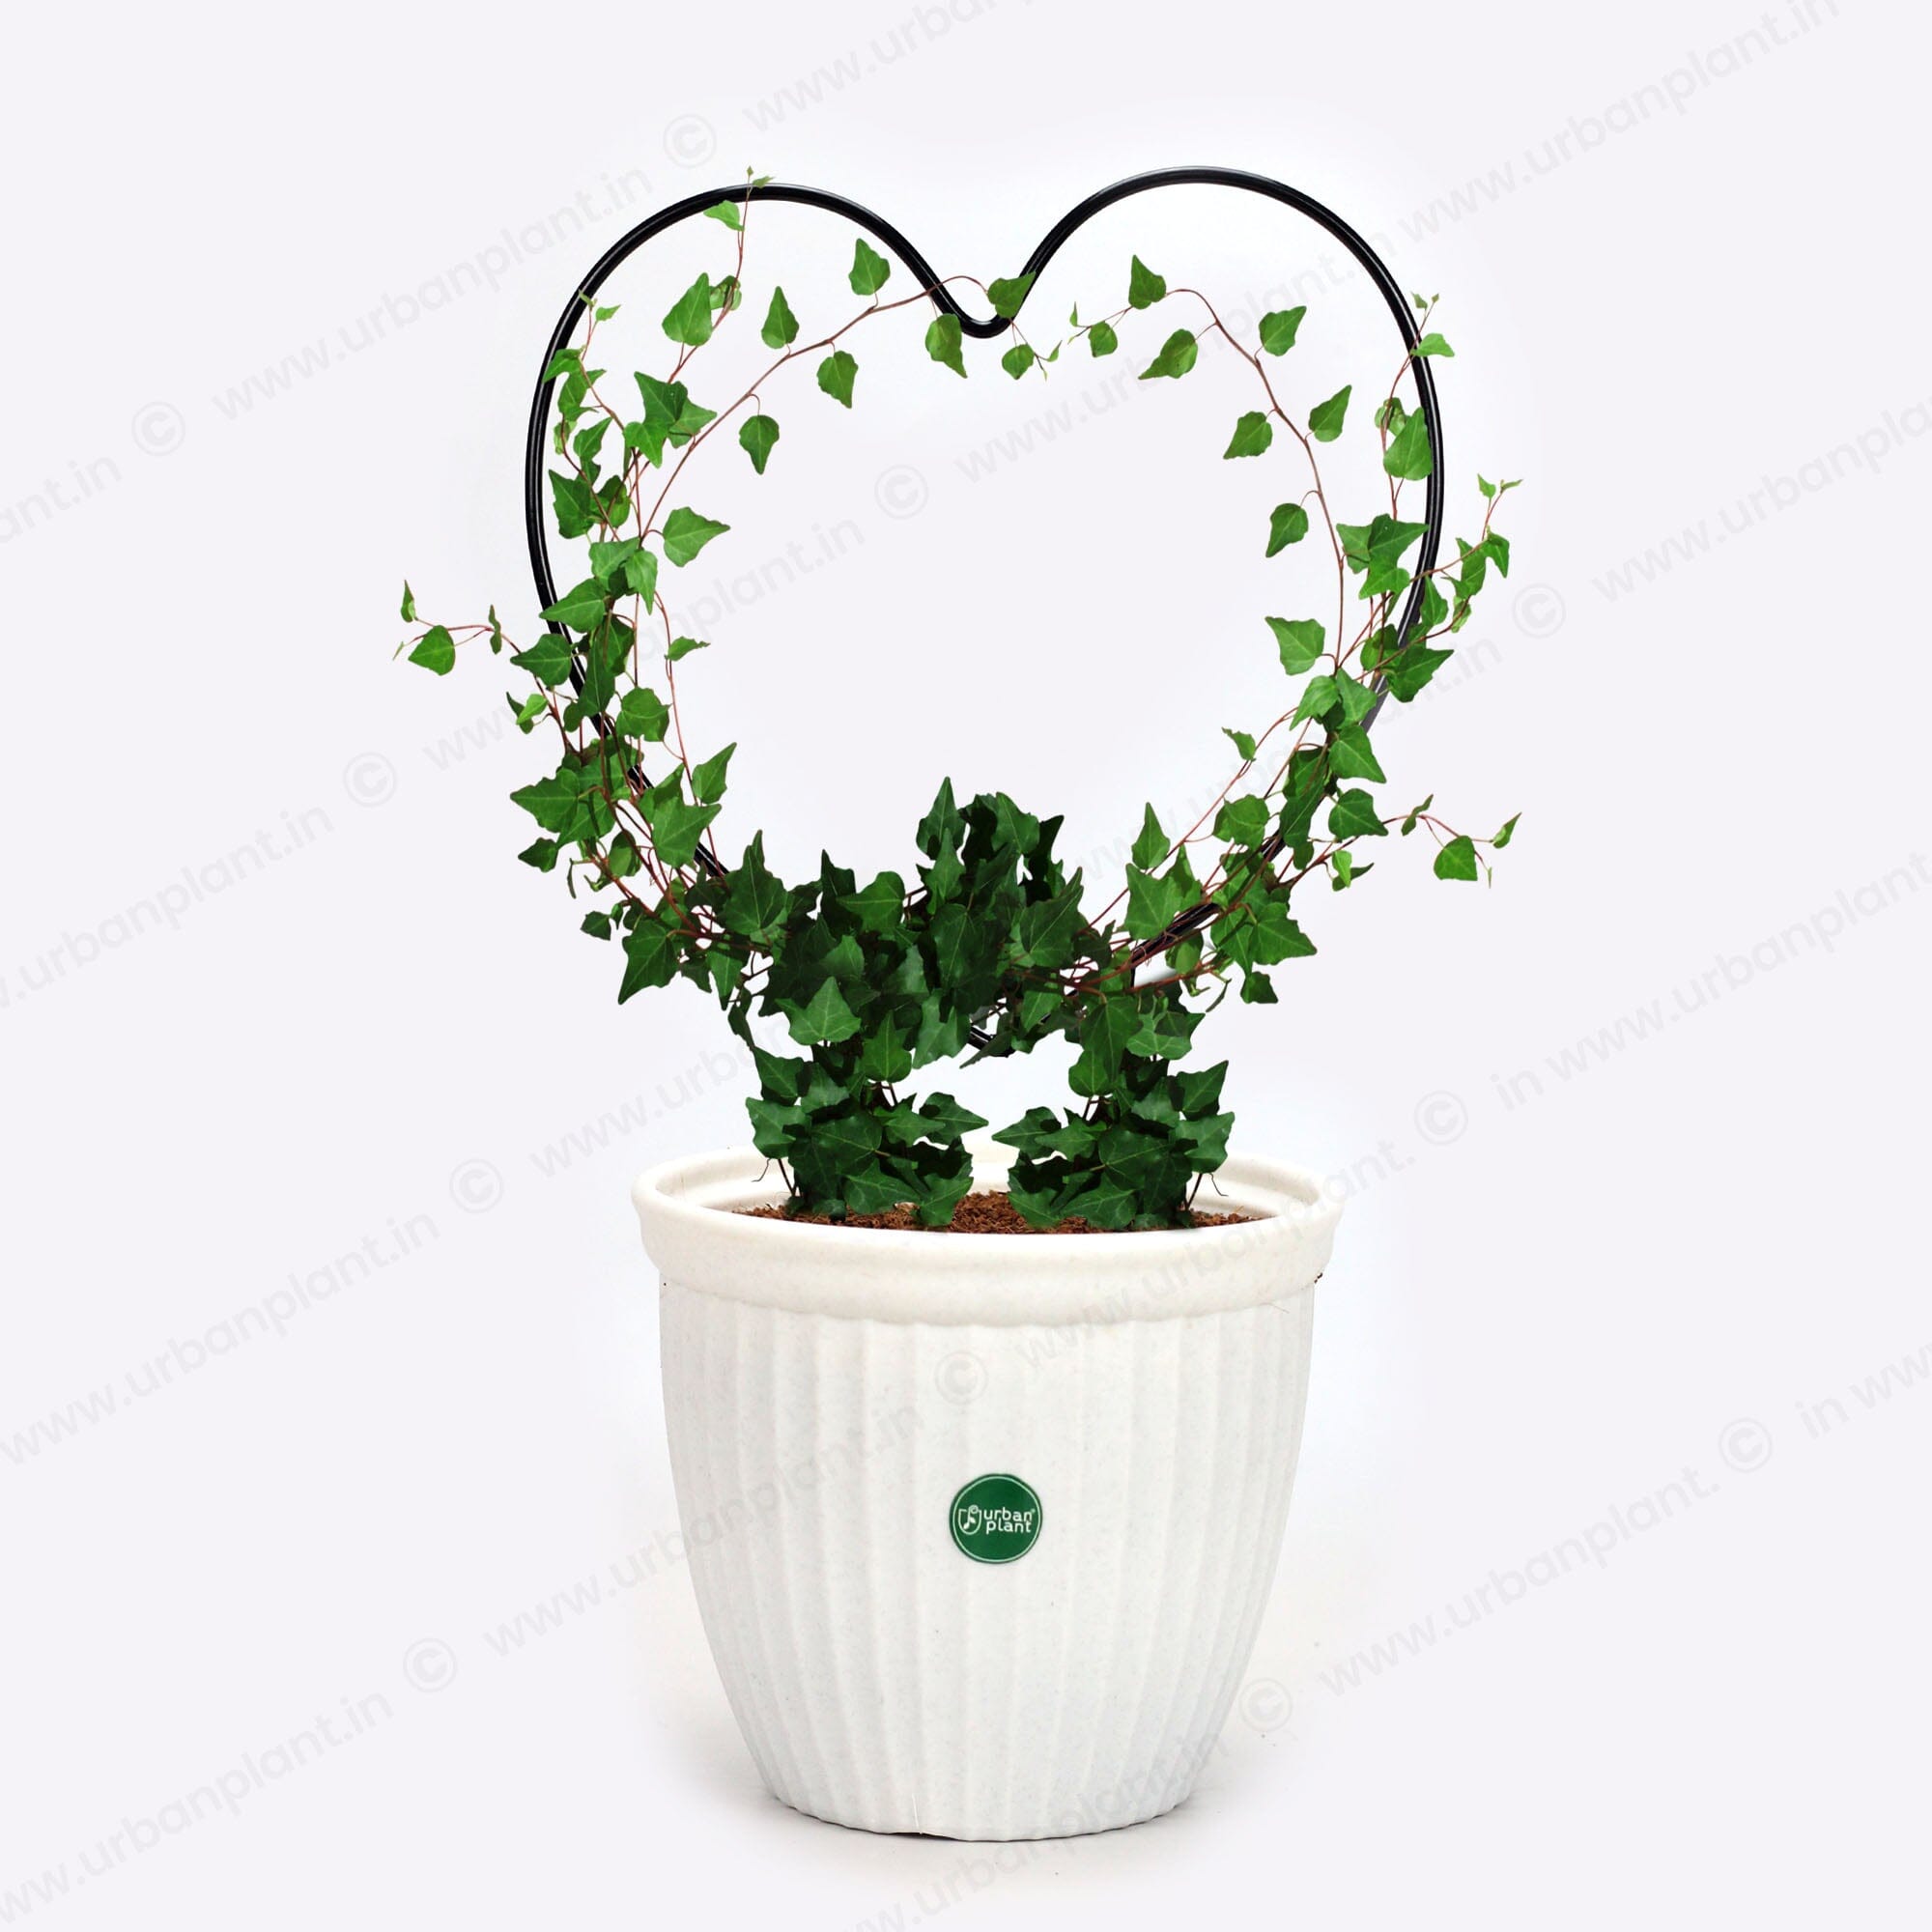 Urban Plant Heart Shaped Trellis for Plant Support and Decoration for Climbing Plants | Plants Climbing Holder Rack (Pack of 2) - 1402 Gardening Accessories Urban Plant 